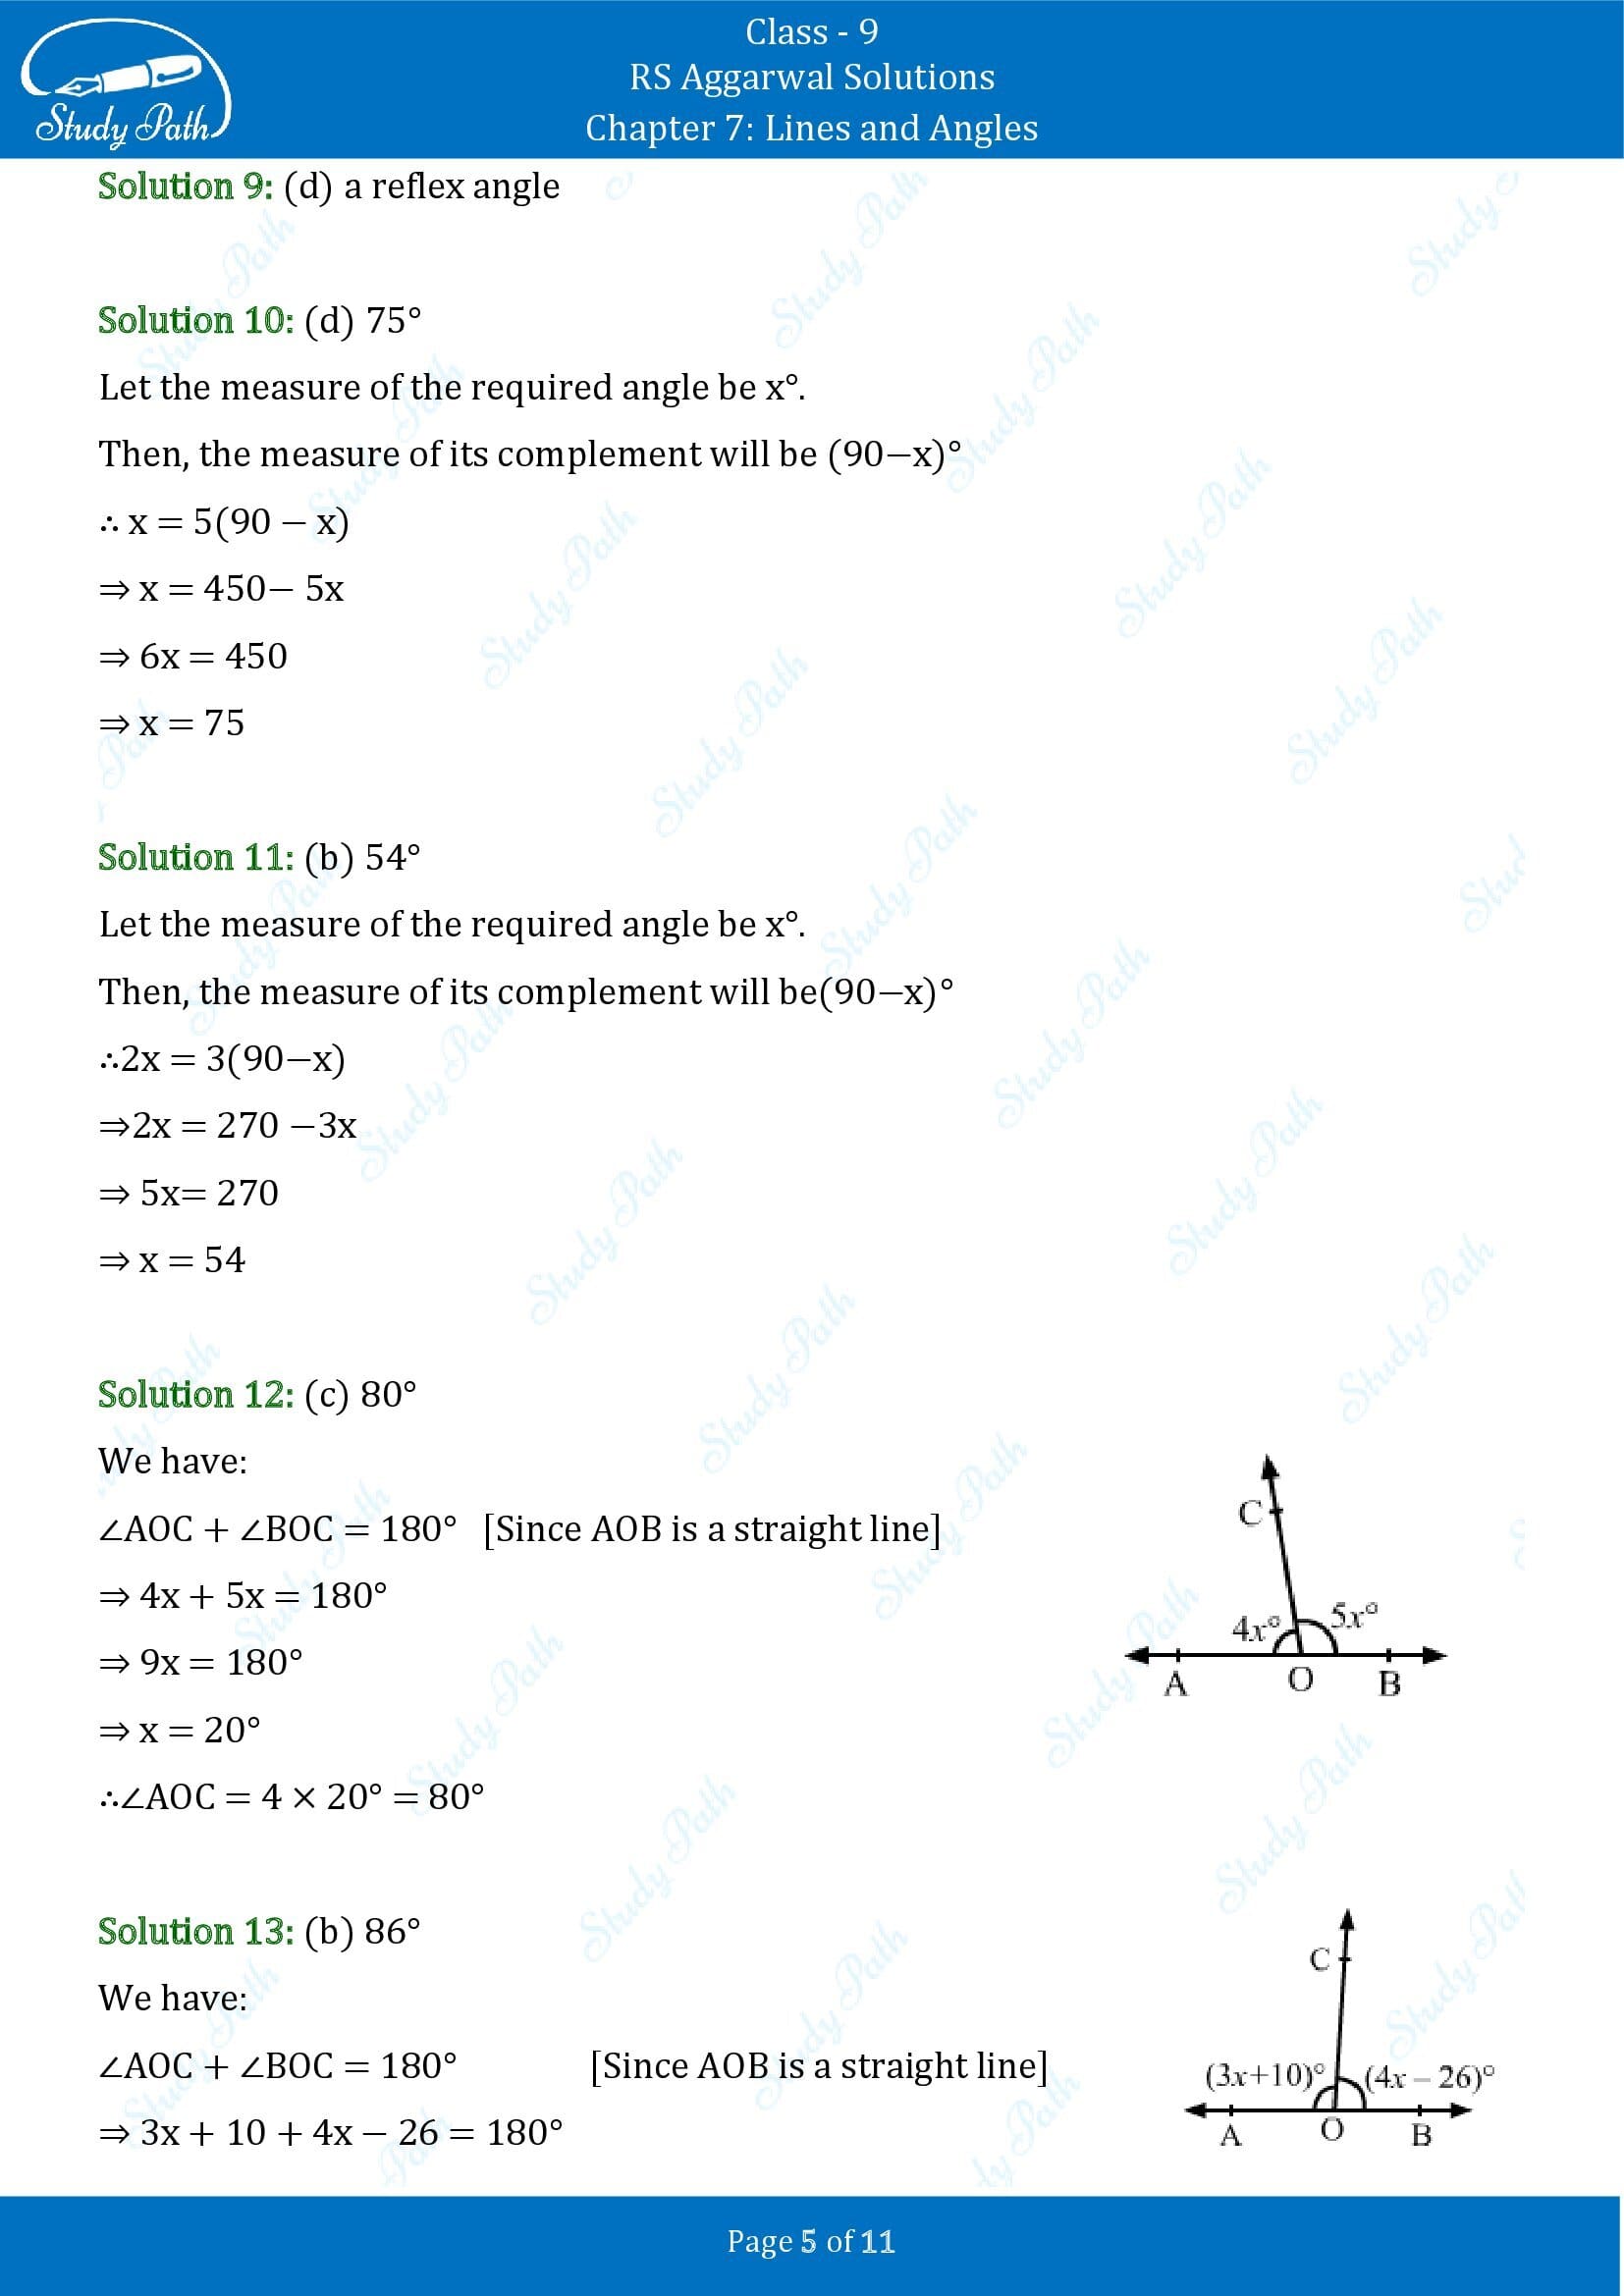 RS Aggarwal Solutions Class 9 Chapter 7 Lines and Angles Multiple Choice Questions MCQs 00005